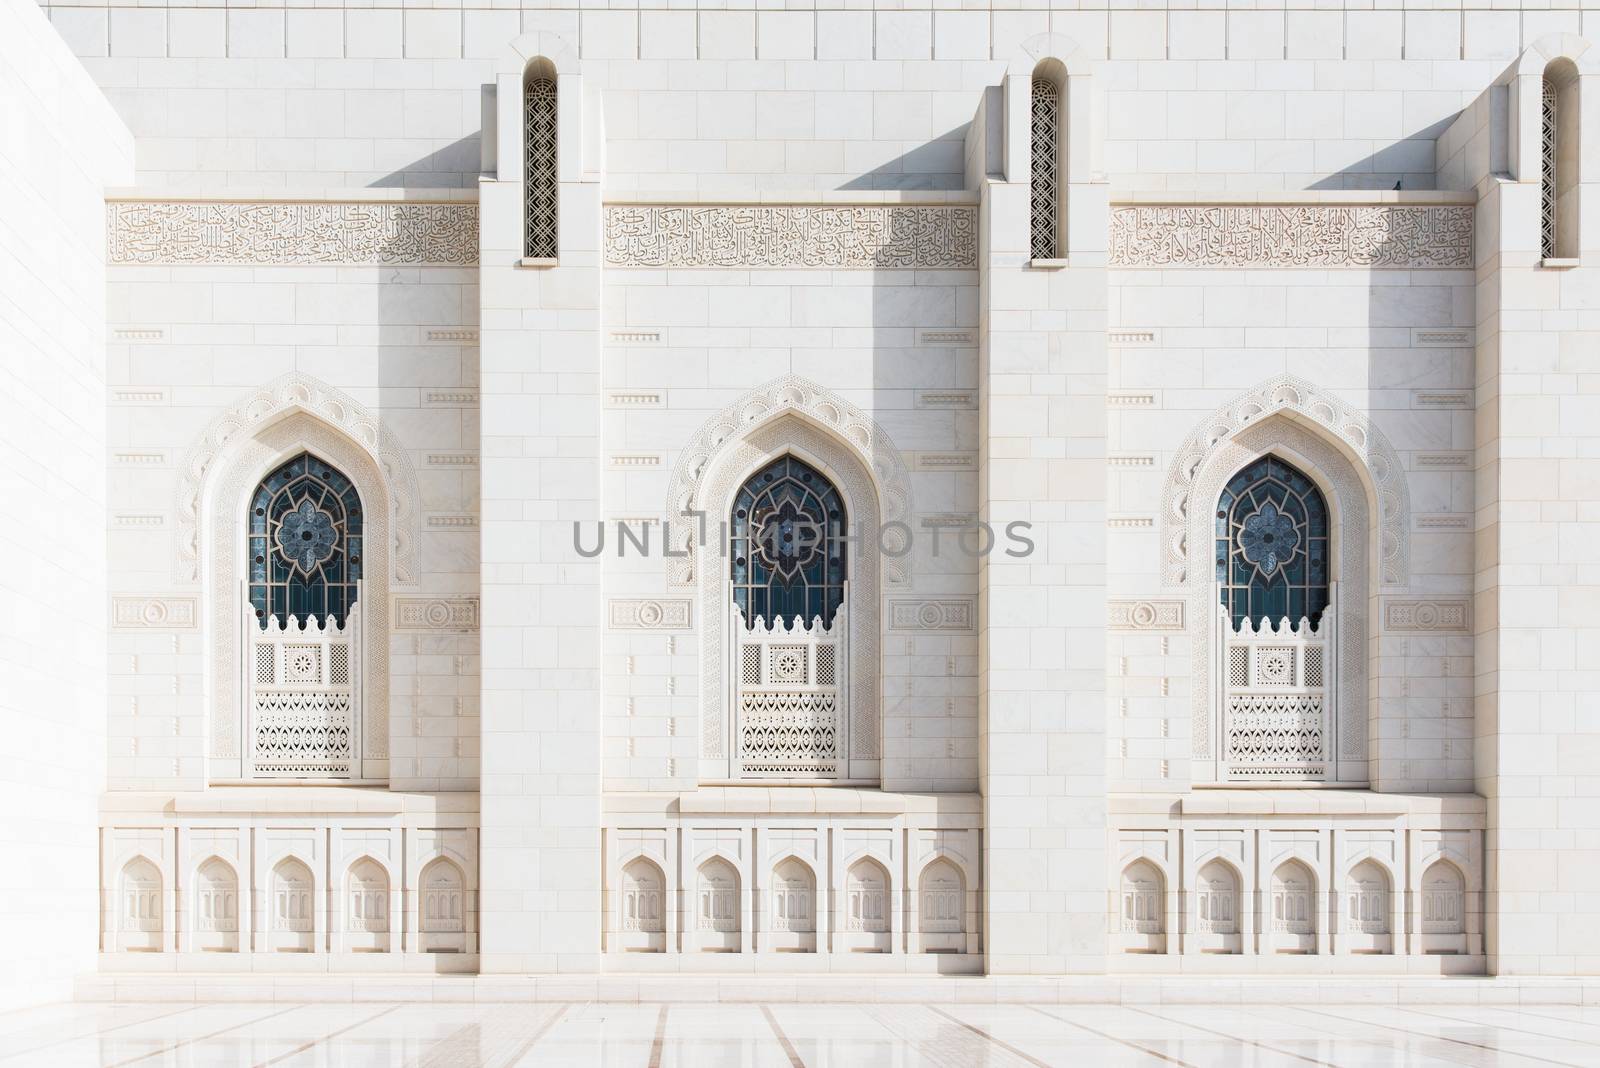 Exterior detail of the Sultan Qaboos Grand Mosque in Muscat, the main mosque of The Sultanate of Oman.